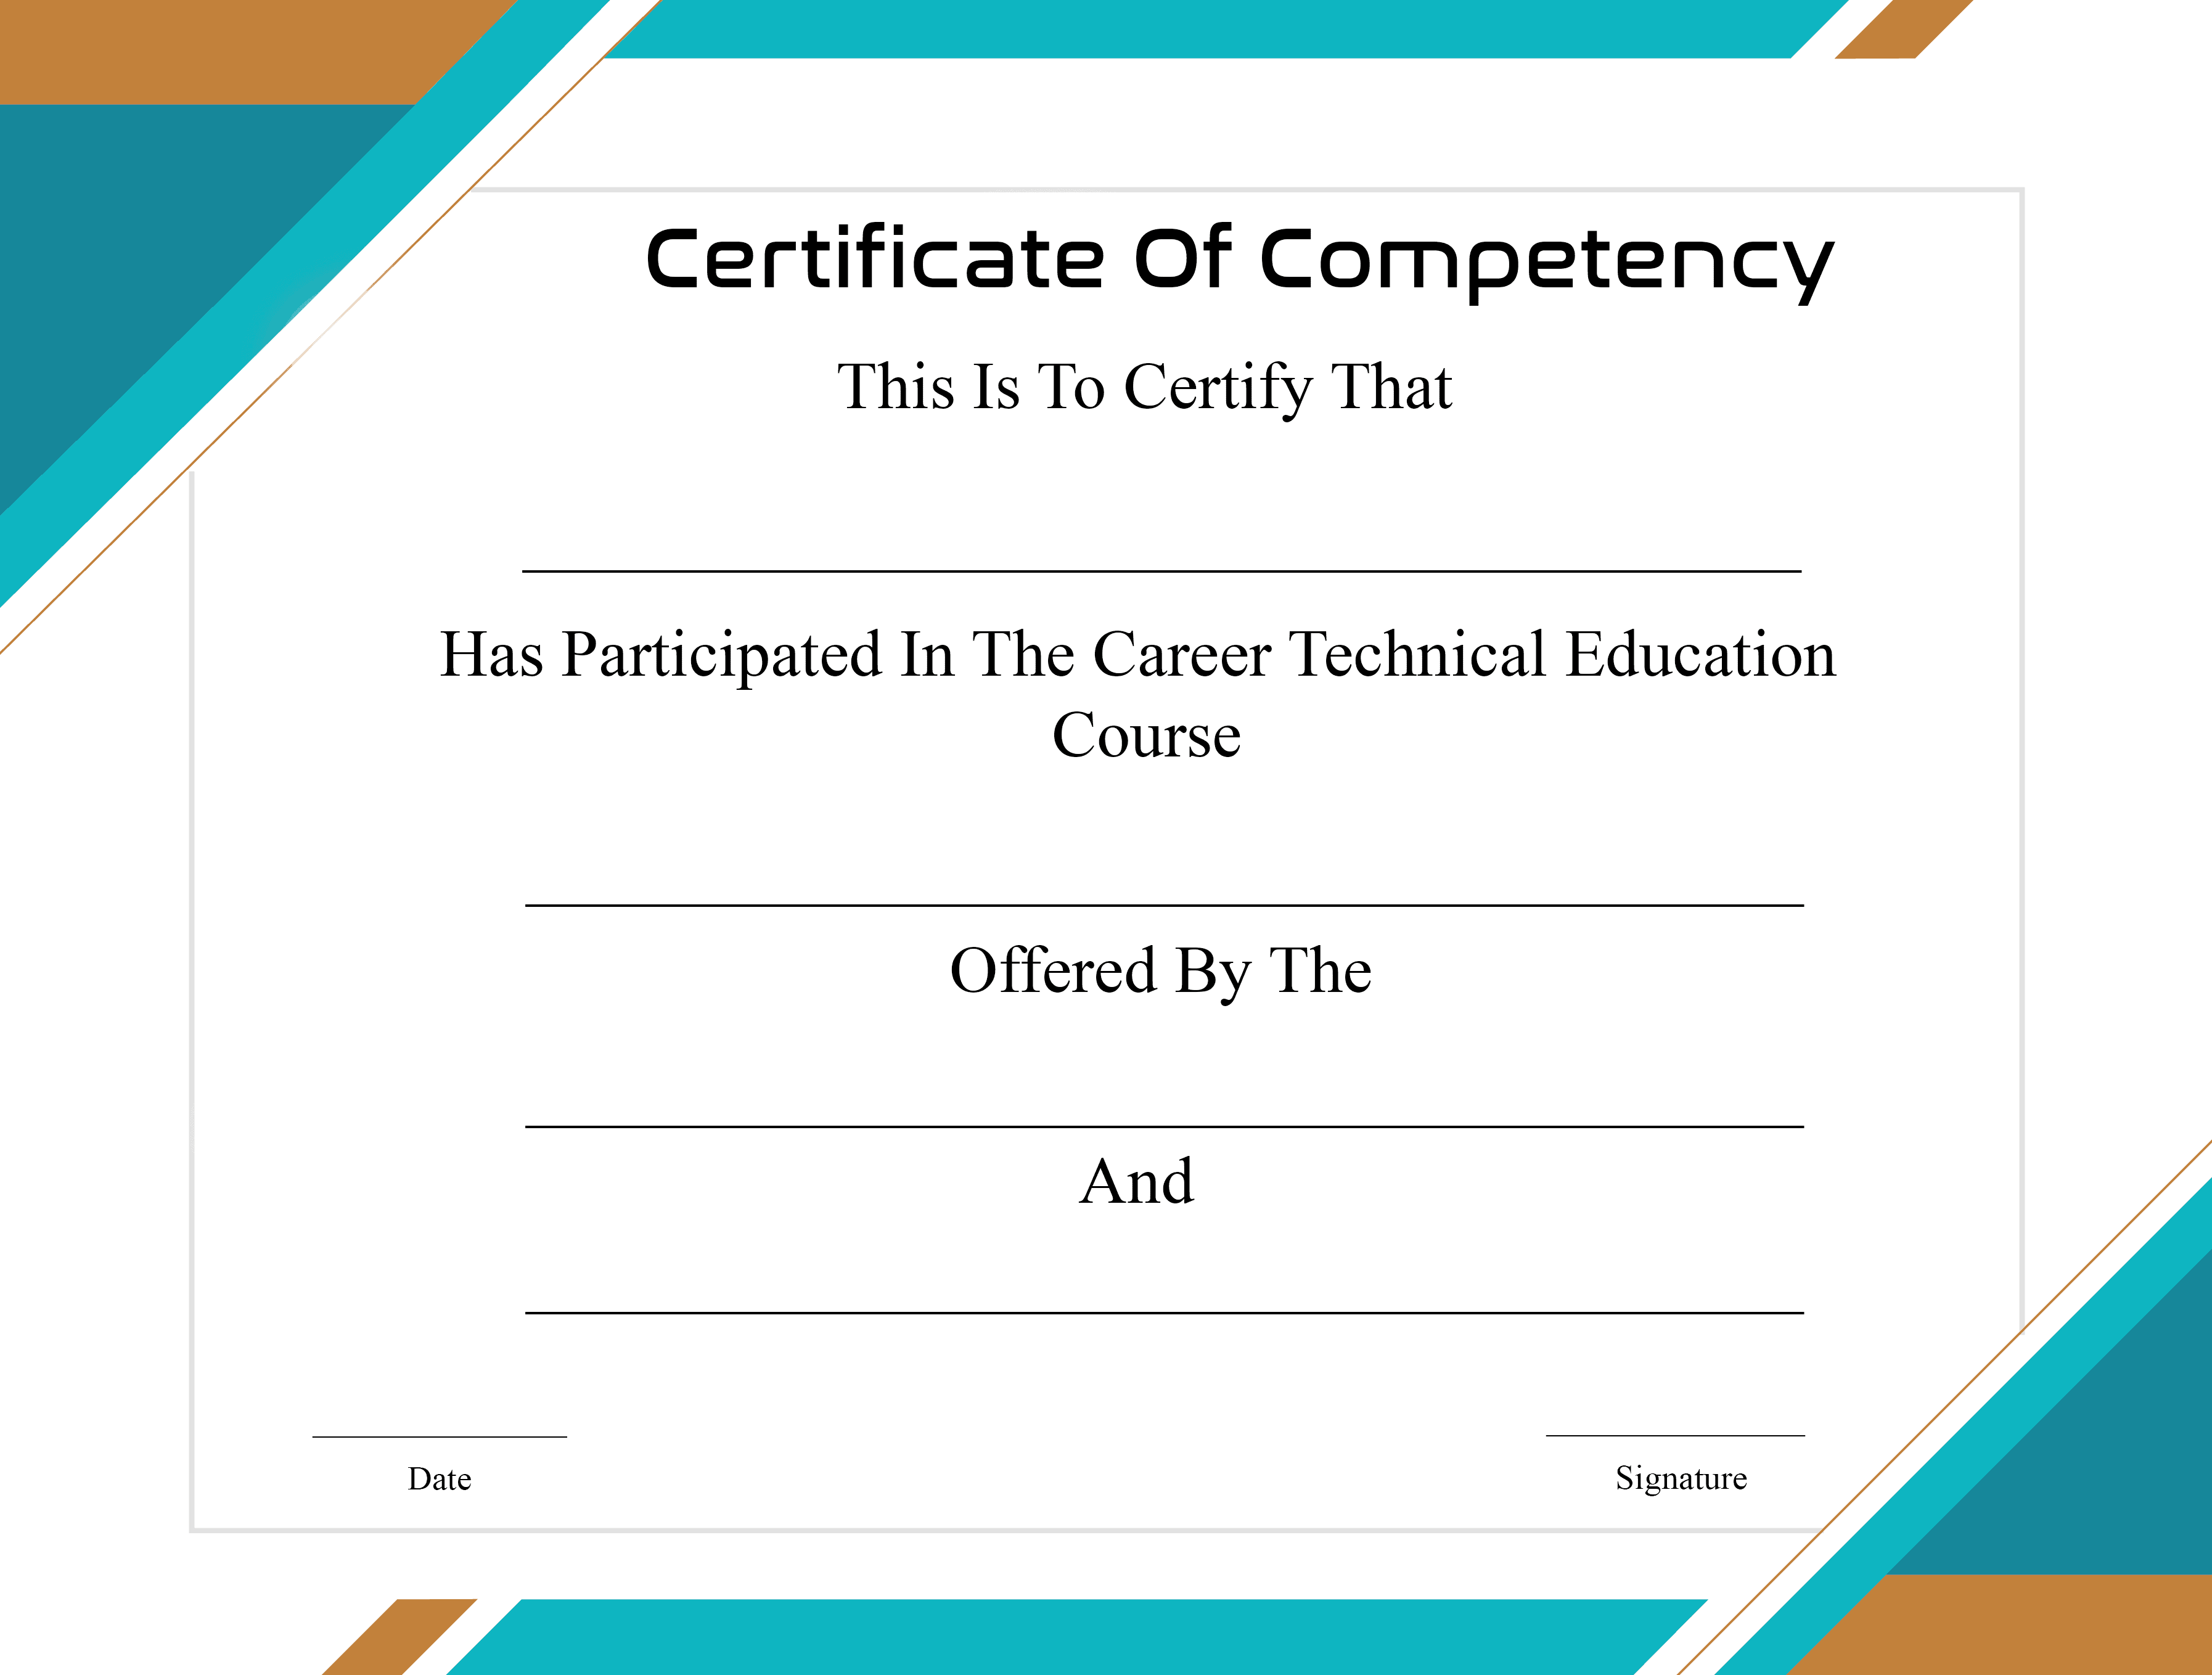 Certificate Of Competency Templates